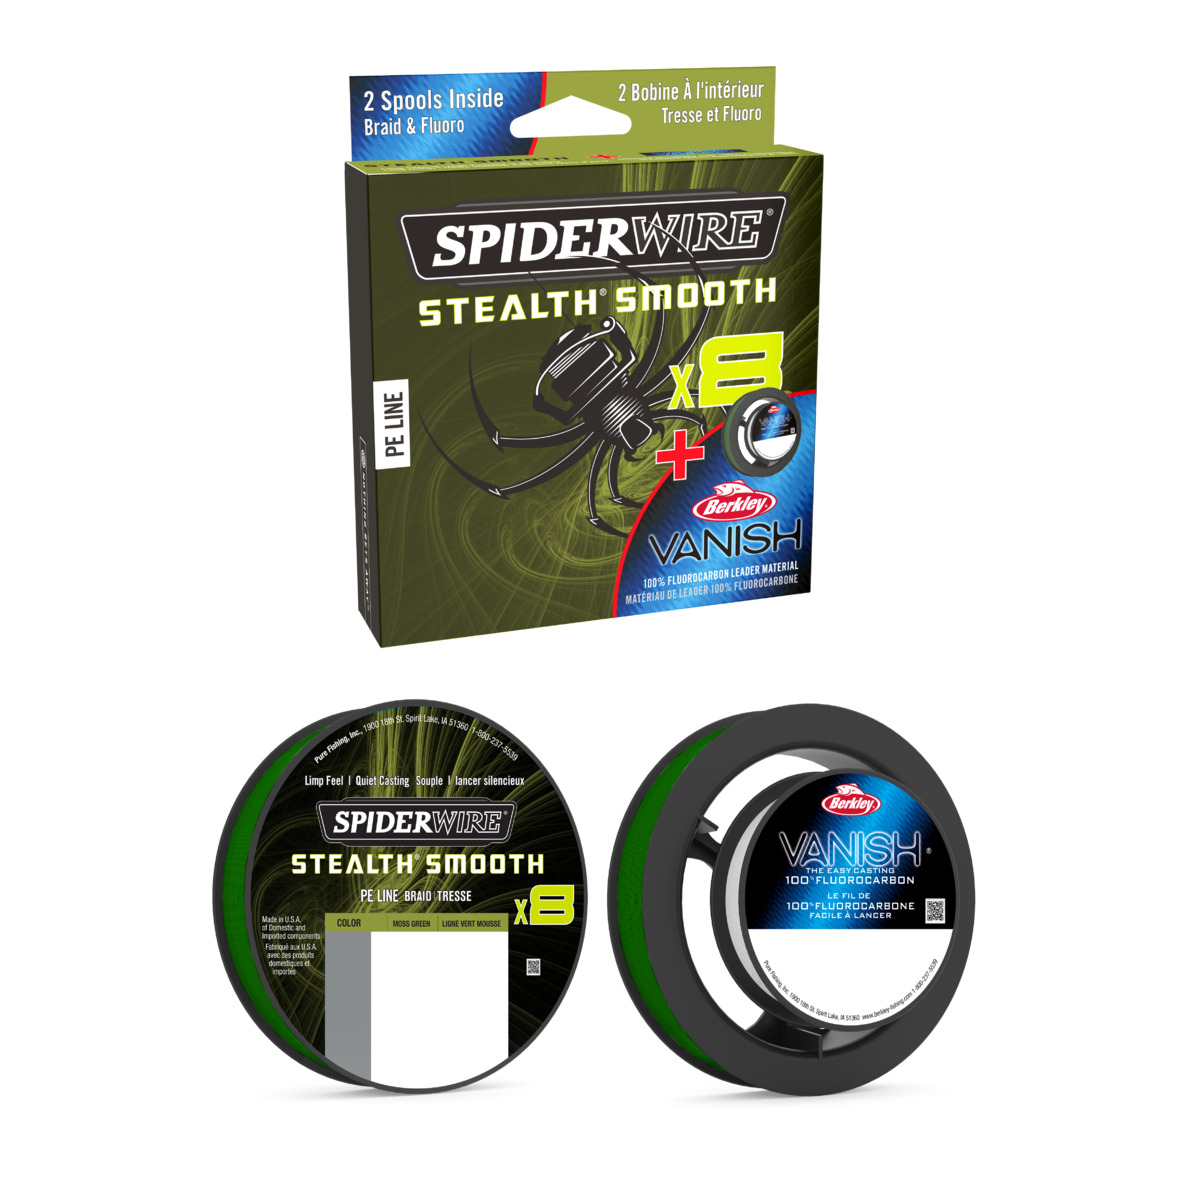 Spiderwire 8 Braid And Fluorocarbon Duo Spool System - 150 m msgrn/Vanish 40 m 0.19/0.45 mm